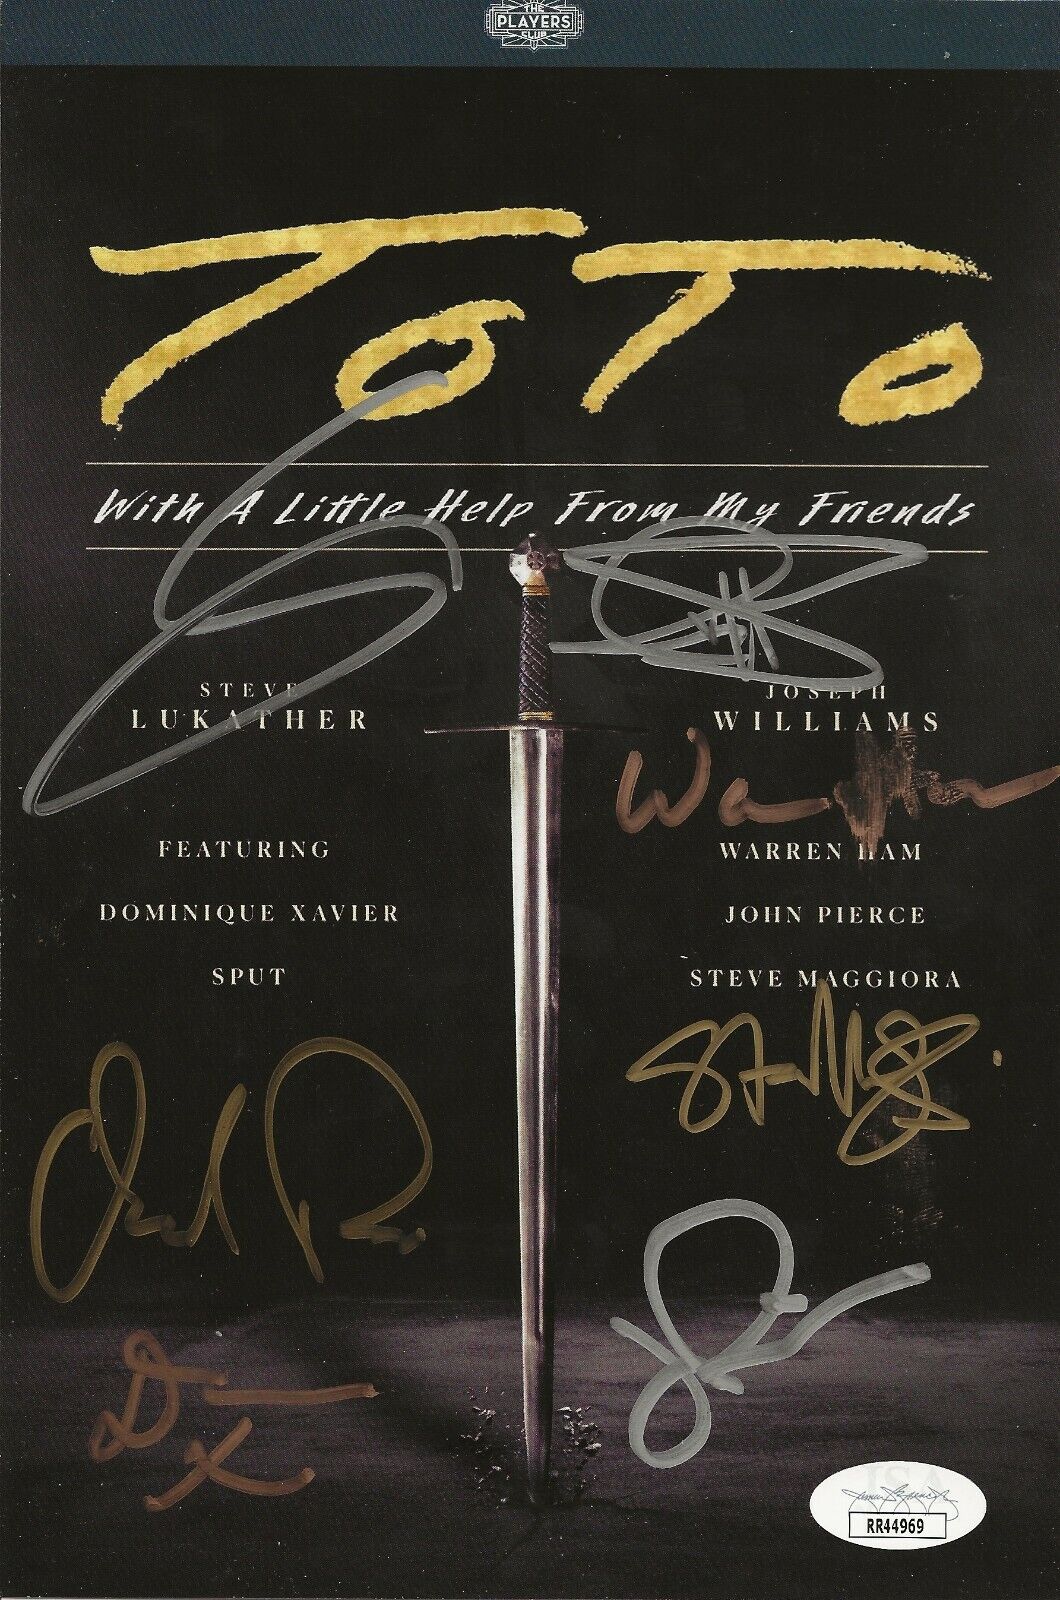 Toto band REAL hand SIGNED With A Little Help From My Friends Advert #1 JSA COA